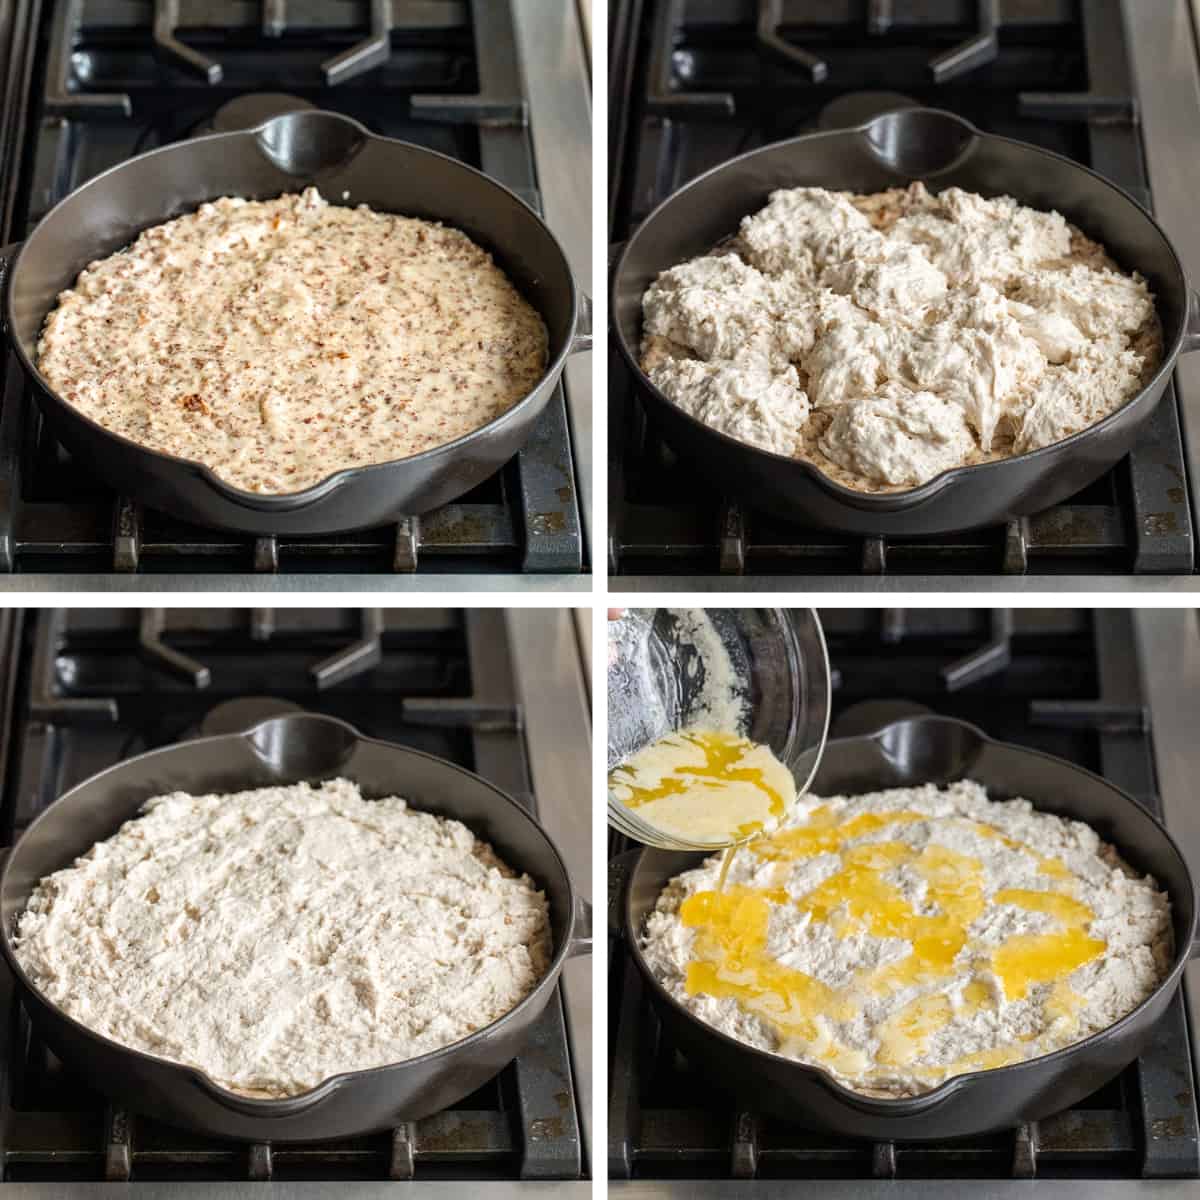 Steps with Gravy in a Skillet, then Adding Butter Swim Biscuit Batter, then Melted Butter to Make Butter Swim Biscuits and Gravy Bake.